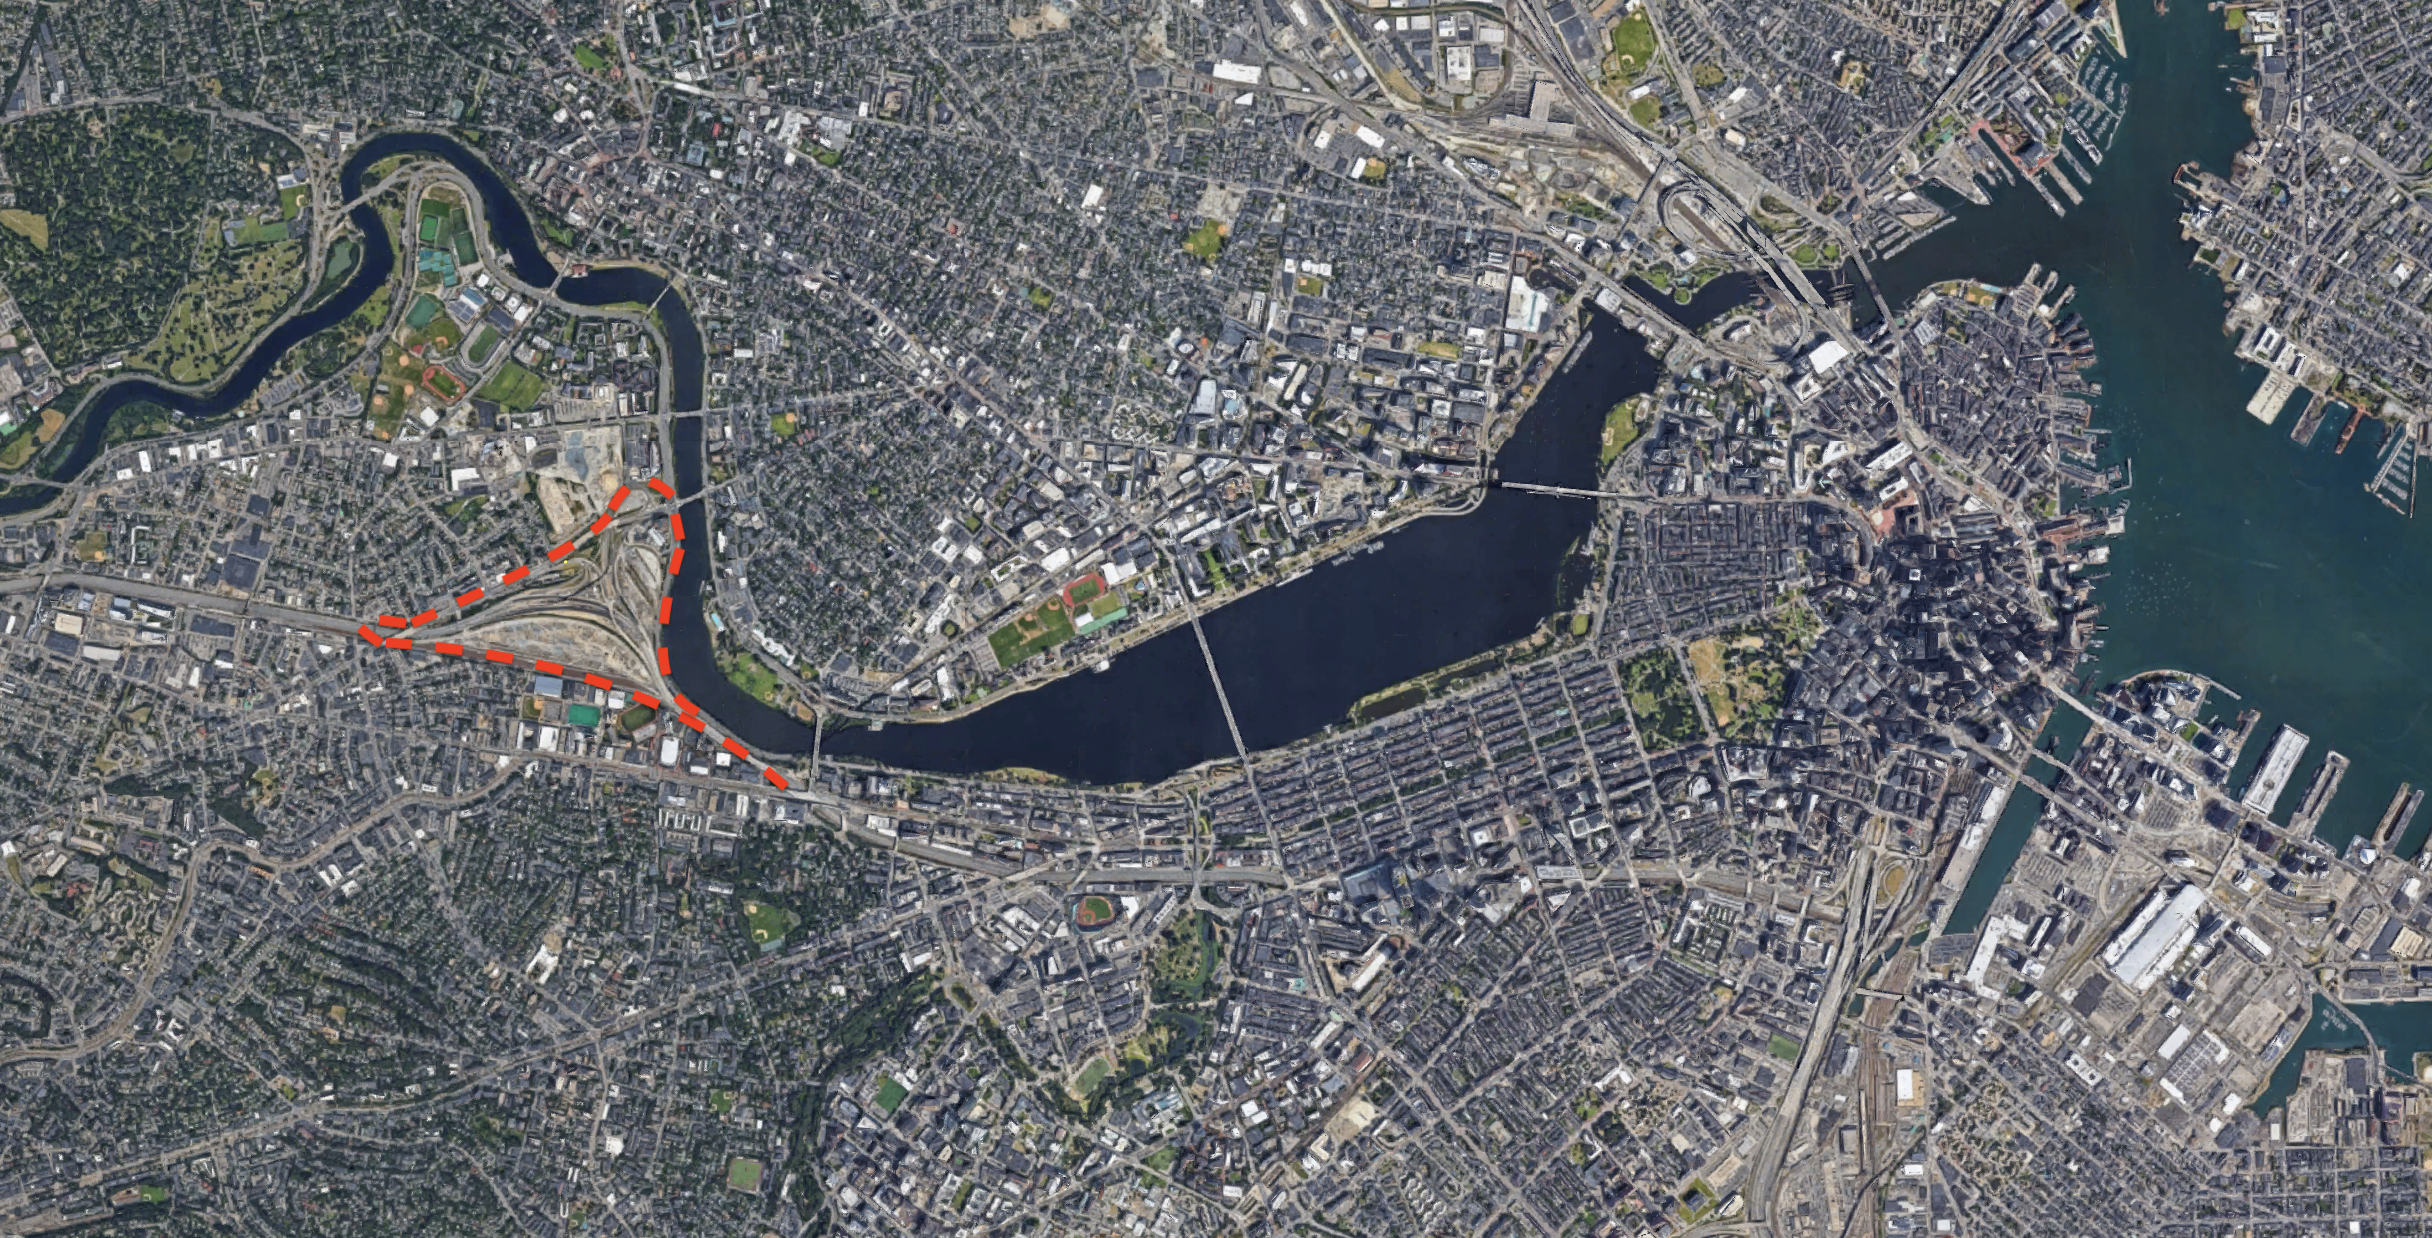 MassDOT's "Allston Intermodal Project," outlined in the red dashed line, covers roughly 90 acres on the Charles River waterfront, from Cambridge Street in the northwest, to the Framingham/Worcester commuter rail tracks to the south, to the Boston University Bridge to the east.